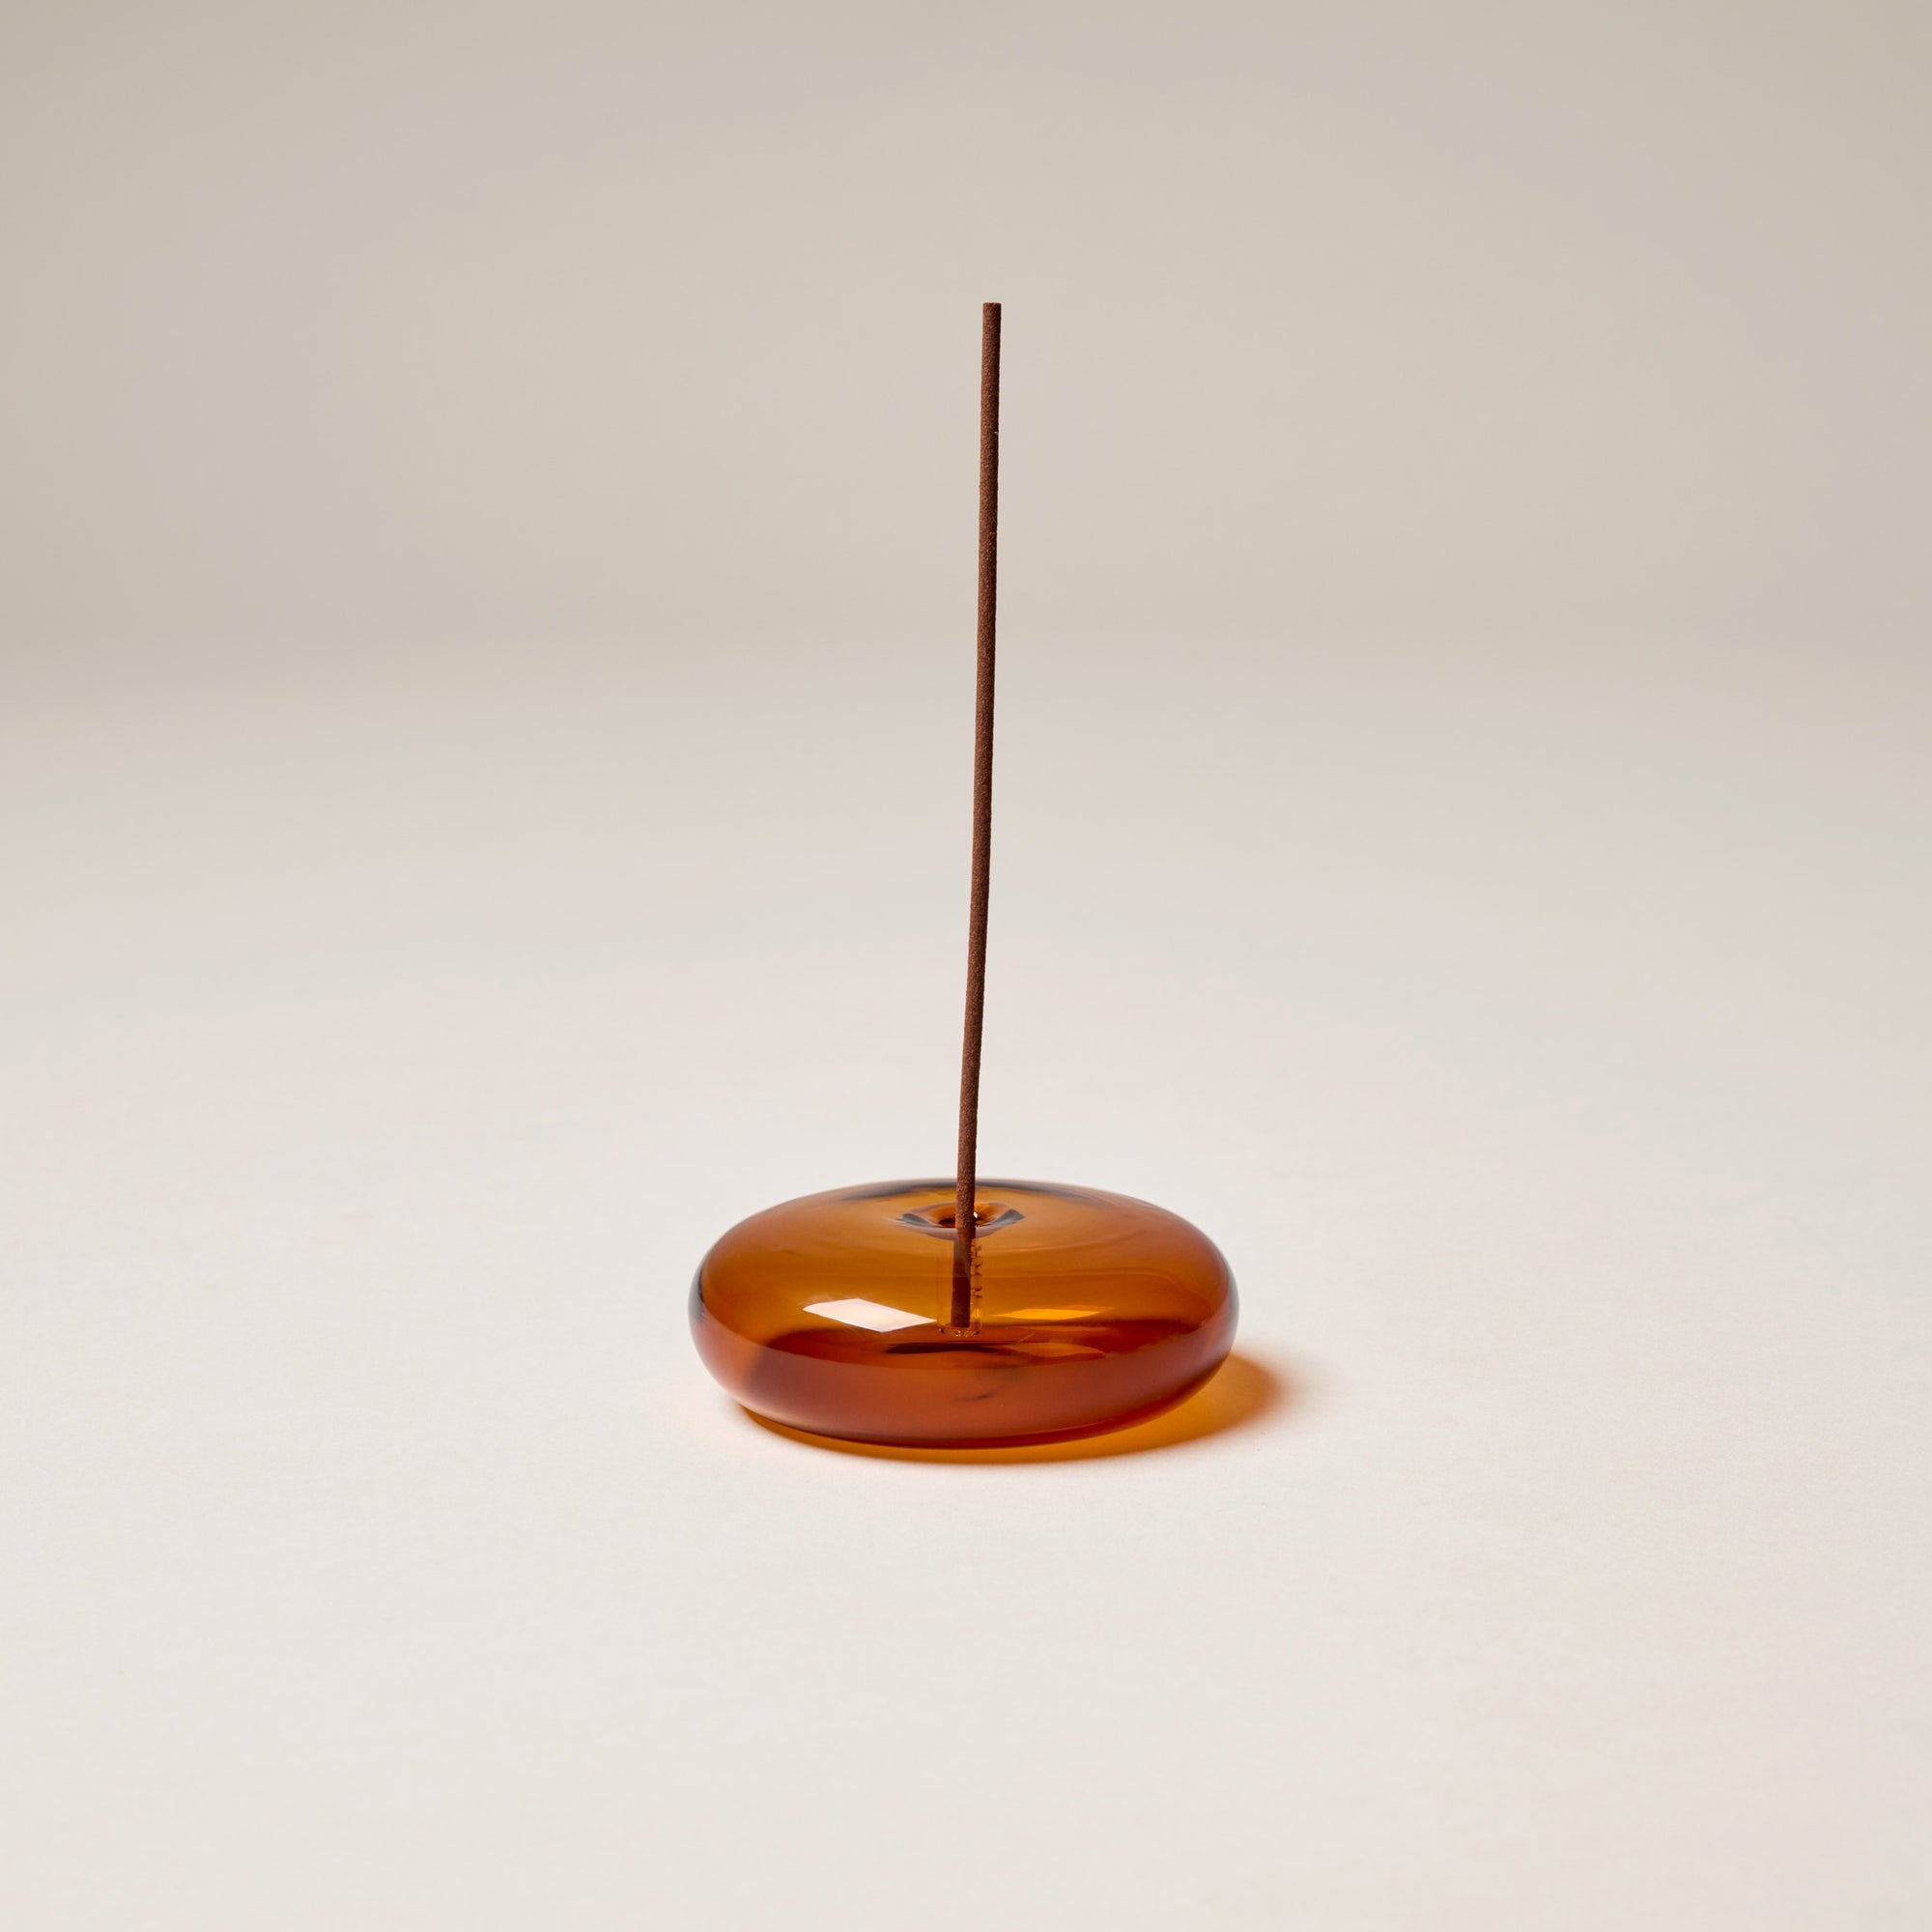 This Is Incense Glass Incense Holder